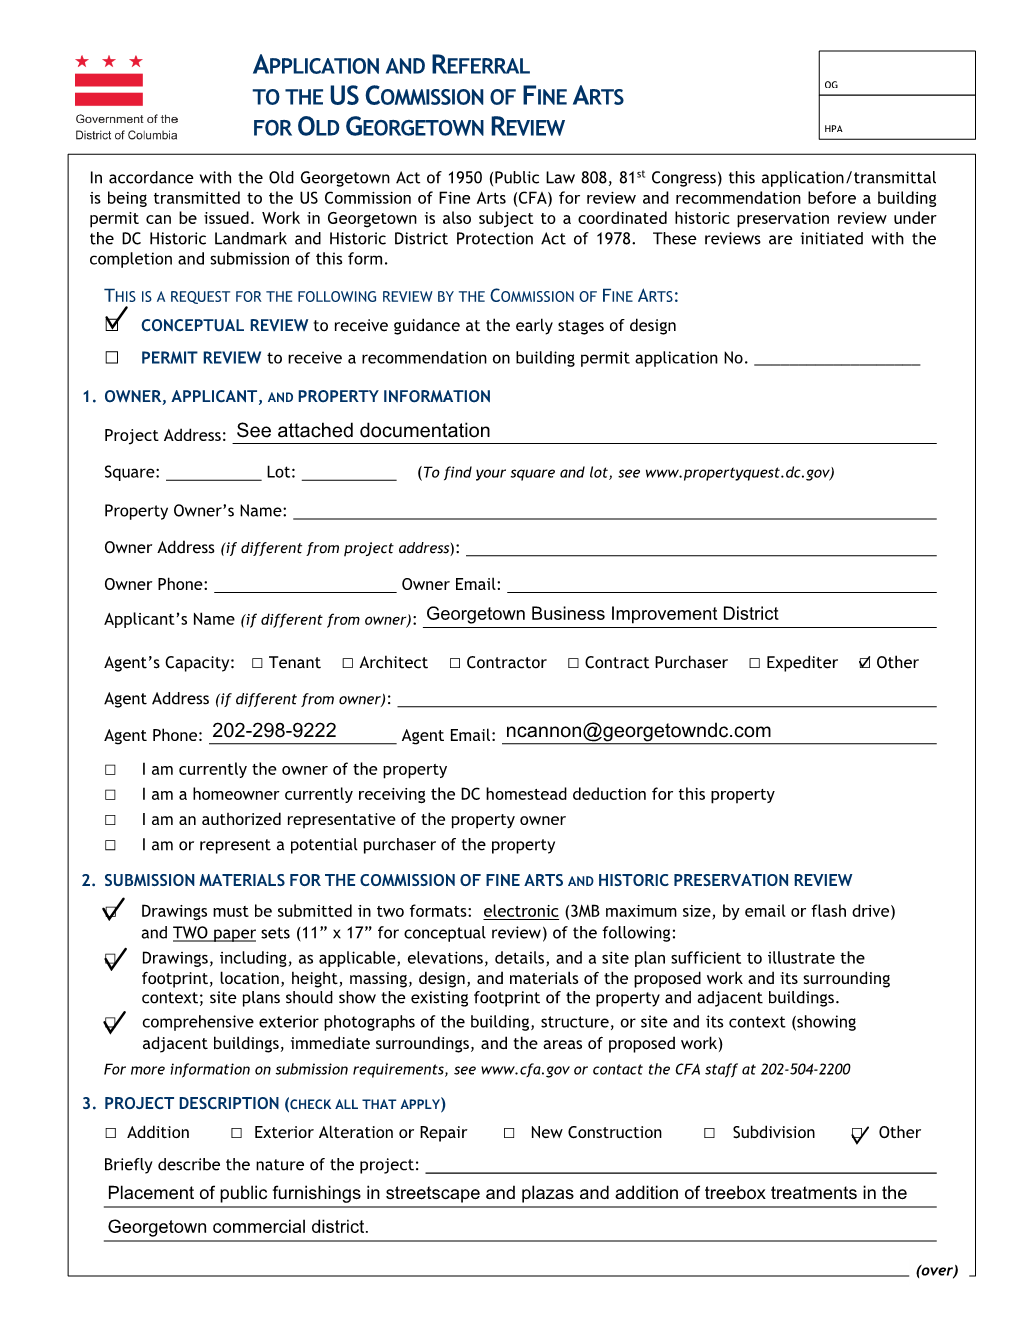 Application and Referral to the Us Commission of Fine